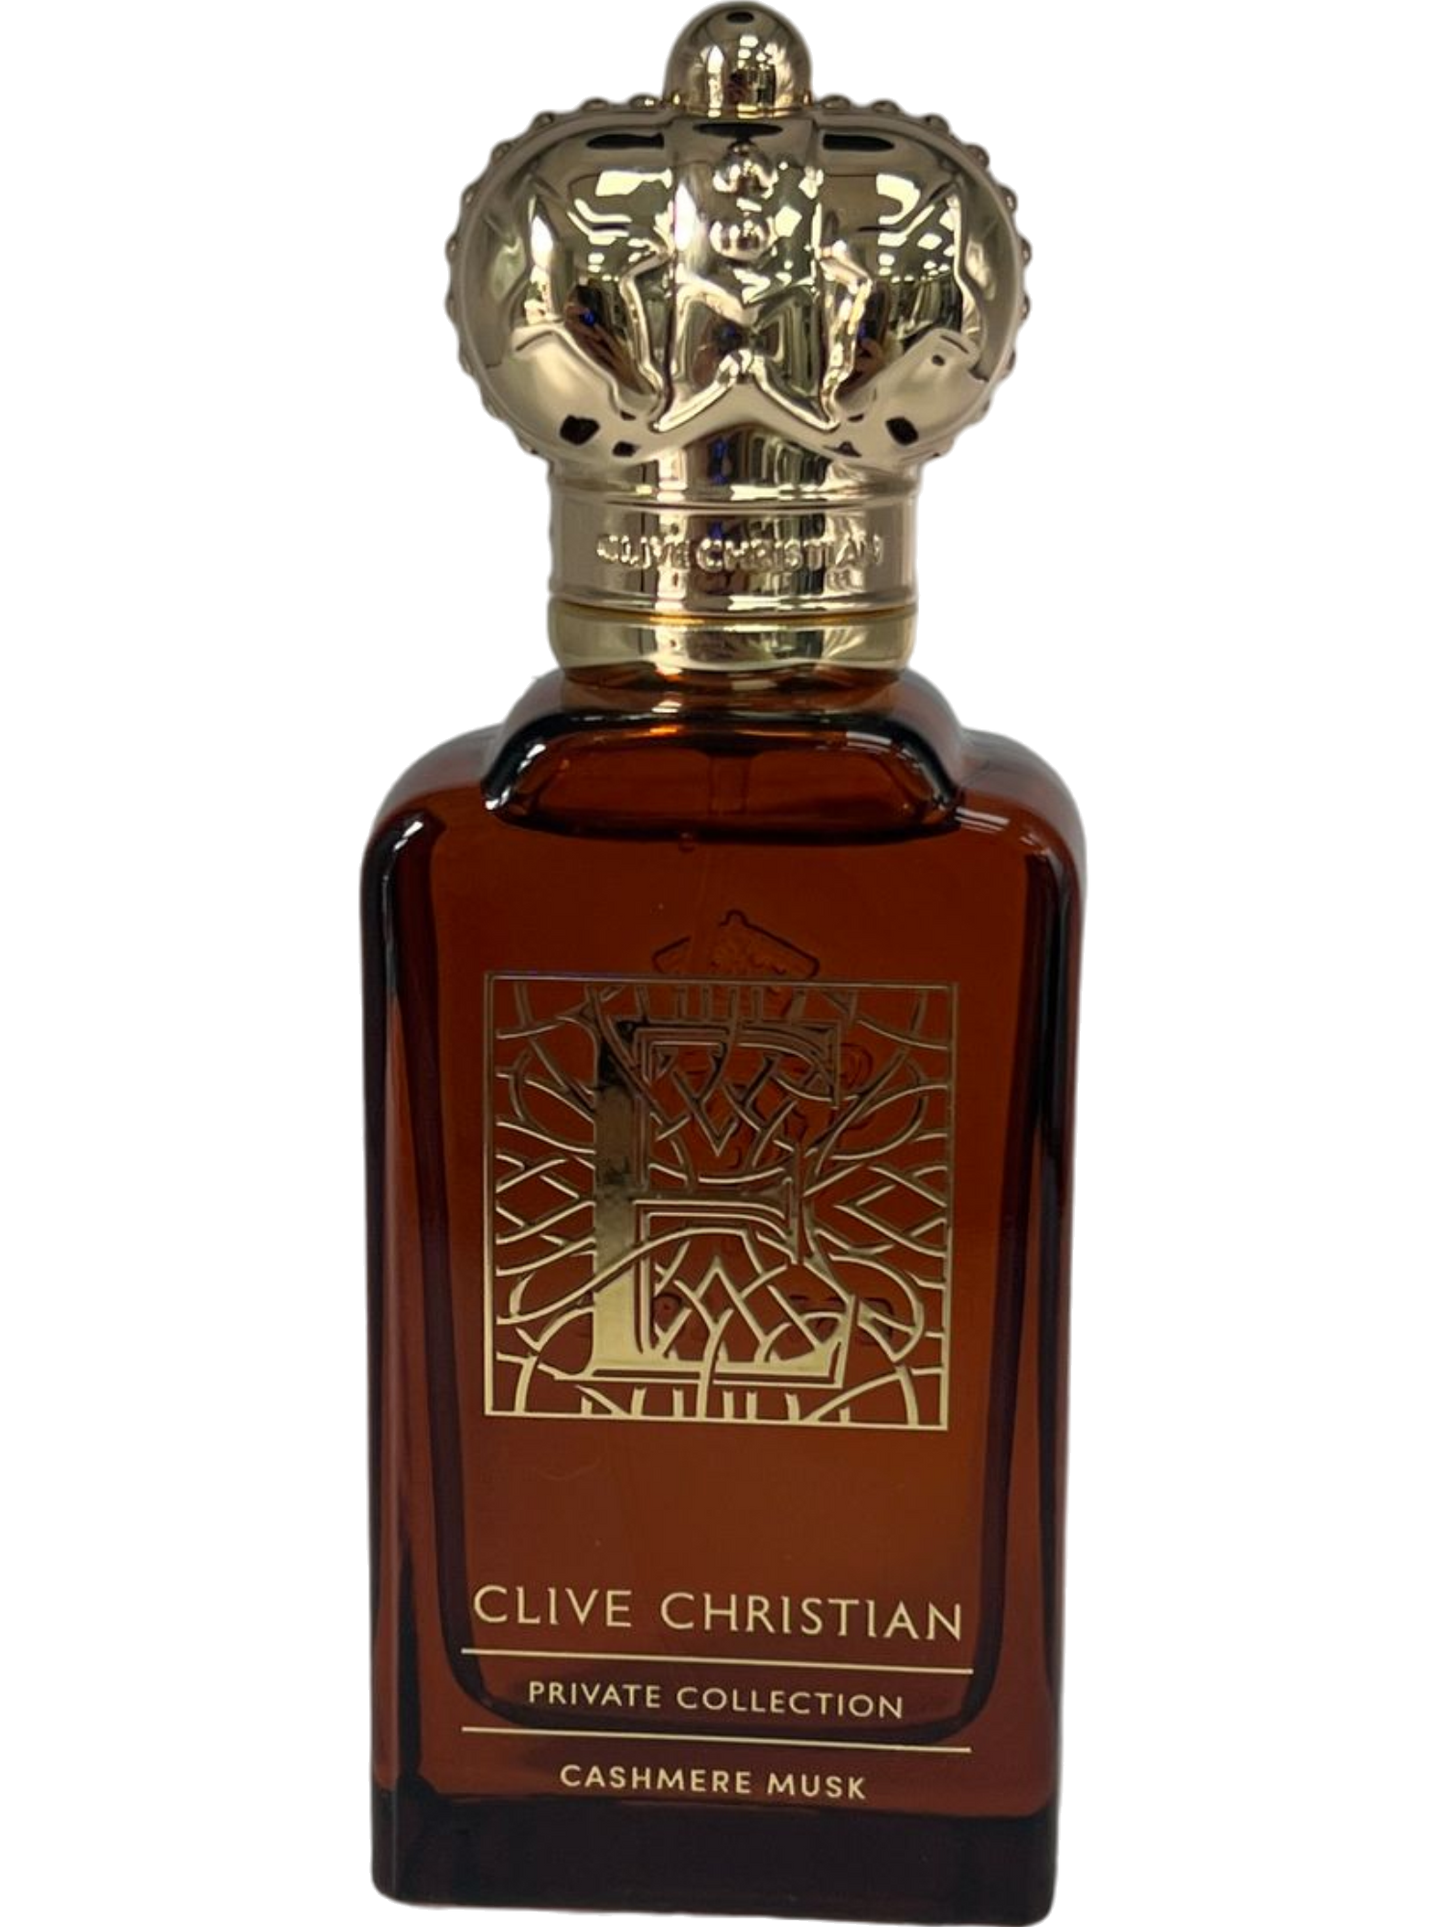 Clive Christian Cashmere Musk Private Collection Perfume